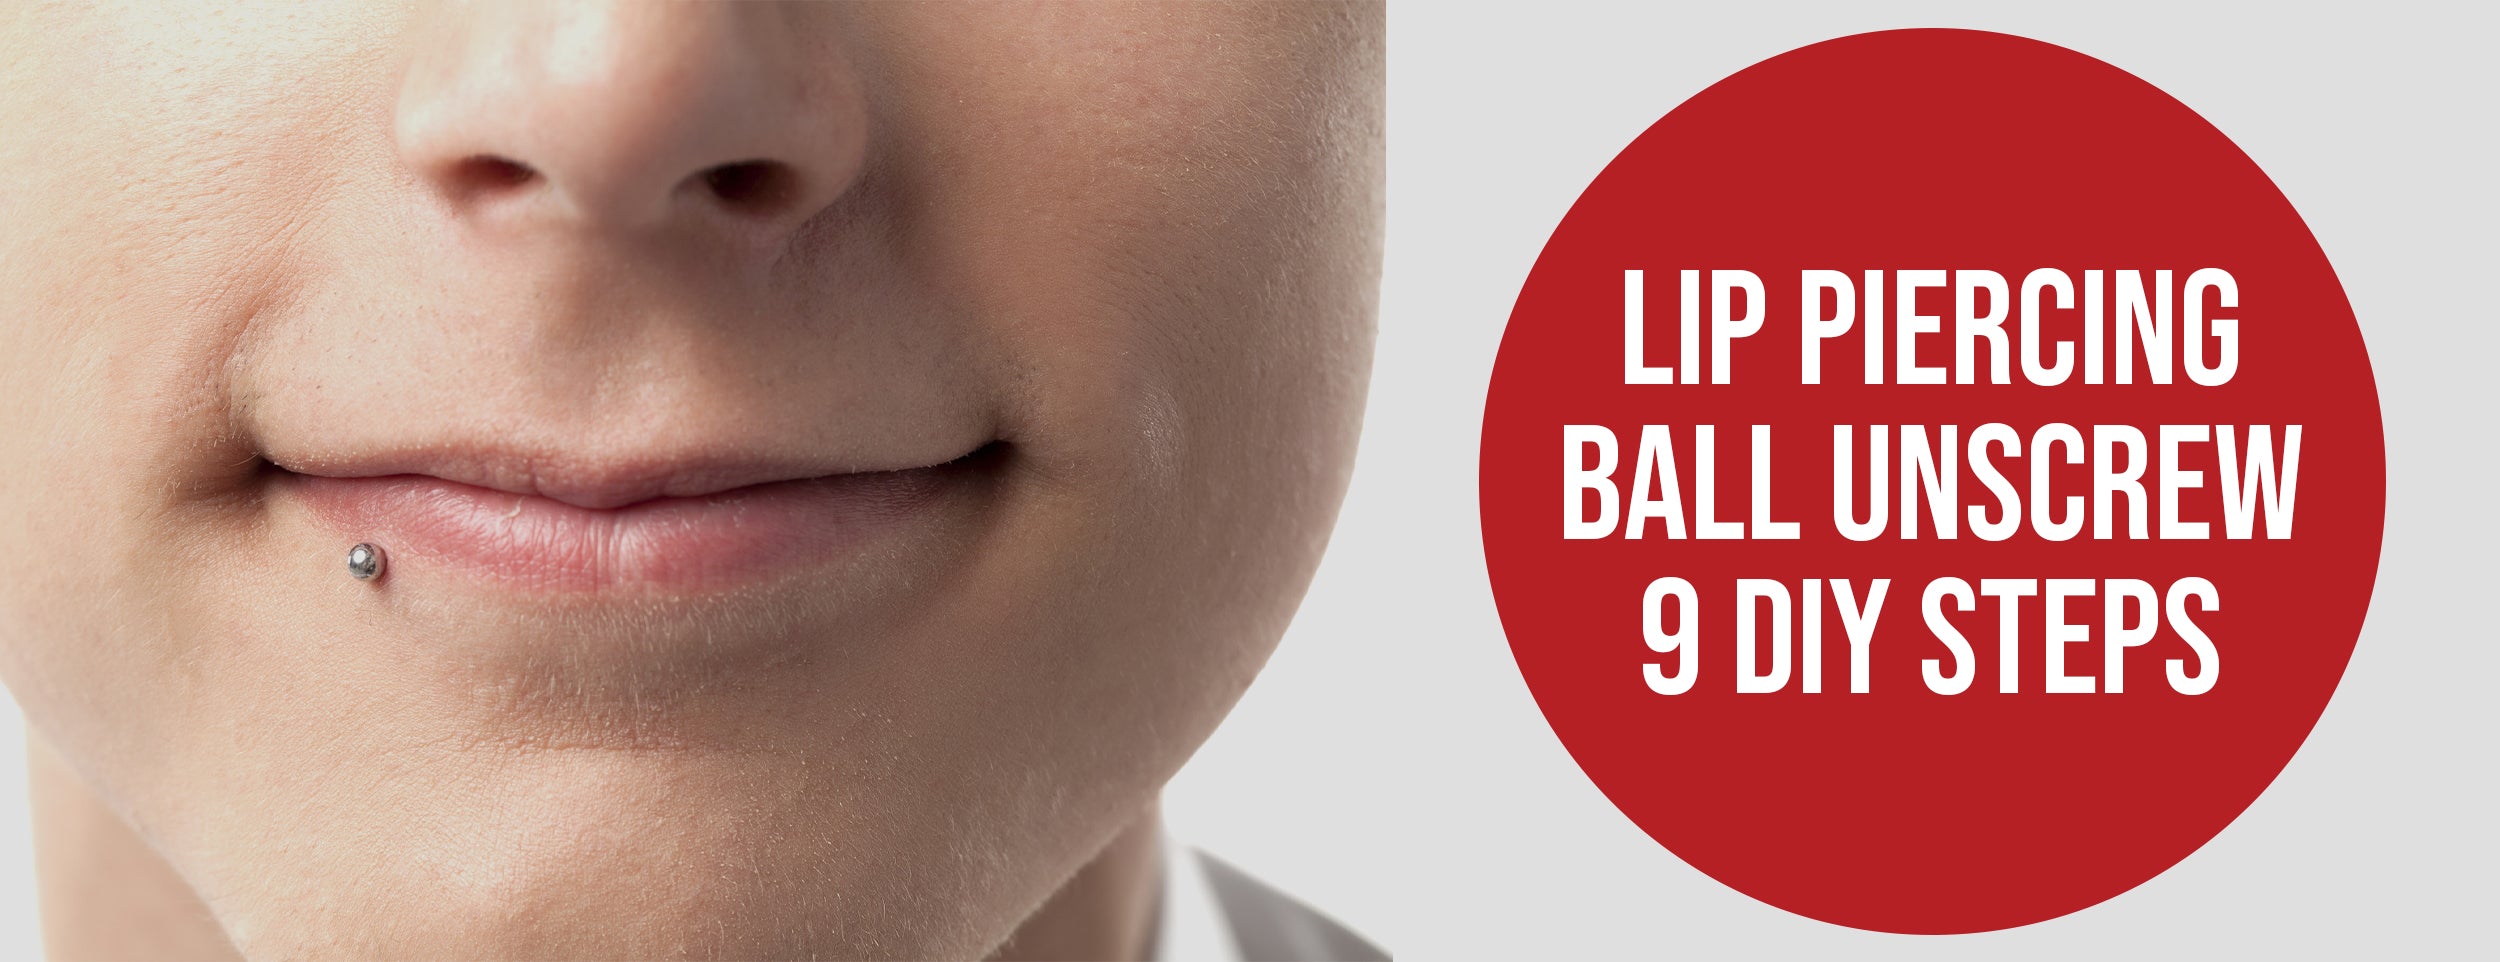 A Step-by-Step Guide to Unscrewing Lip Piercing Balls